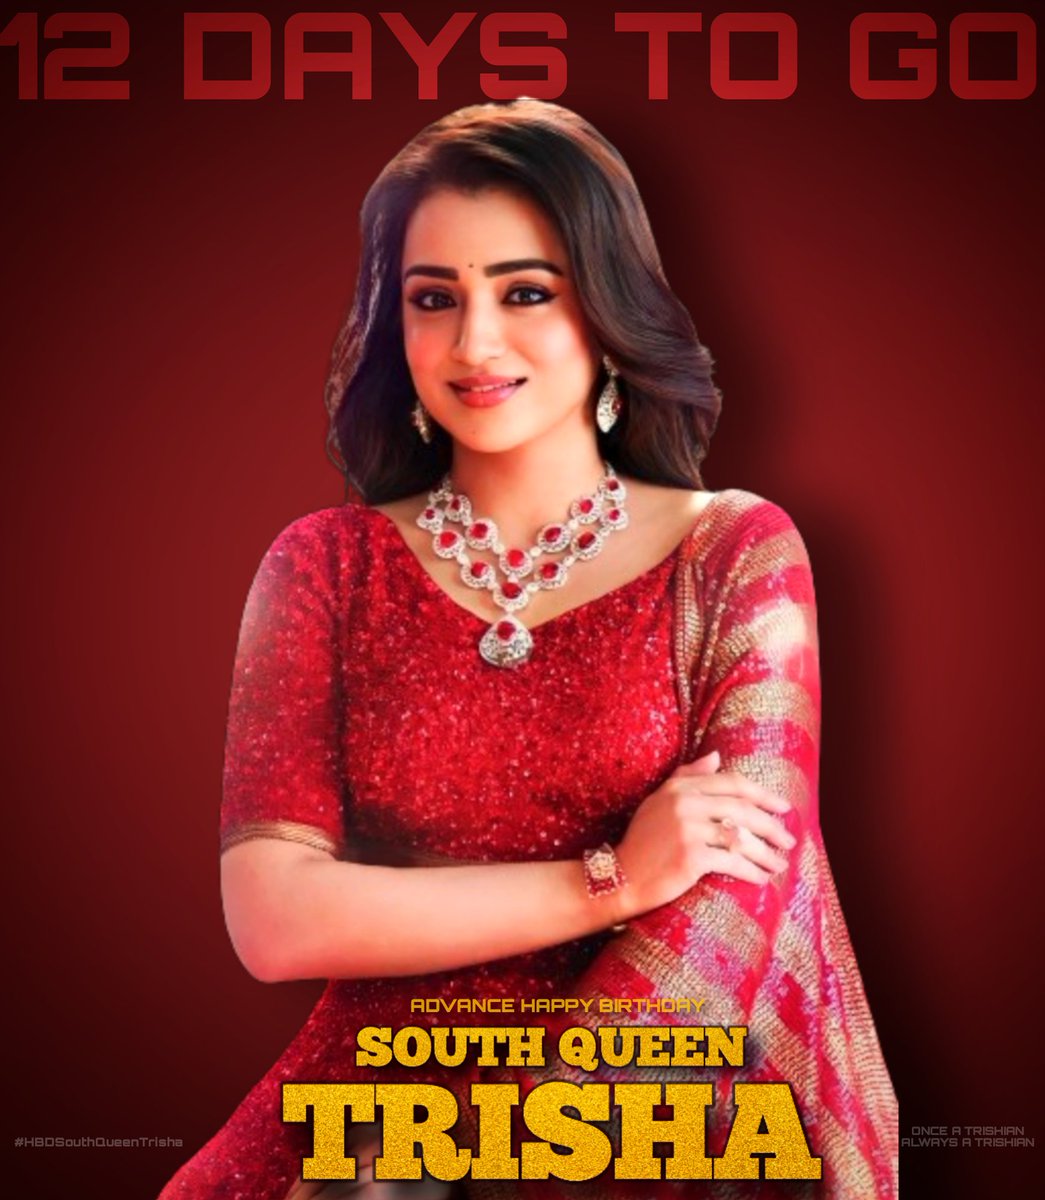 12 DAYS TO GO for South Queen Birthday Blast 😎💥 #AdvanceHBDSouthQueenTrisha #Trisha #SouthQueenTrisha #TrishaKrishnan @trishtrashers